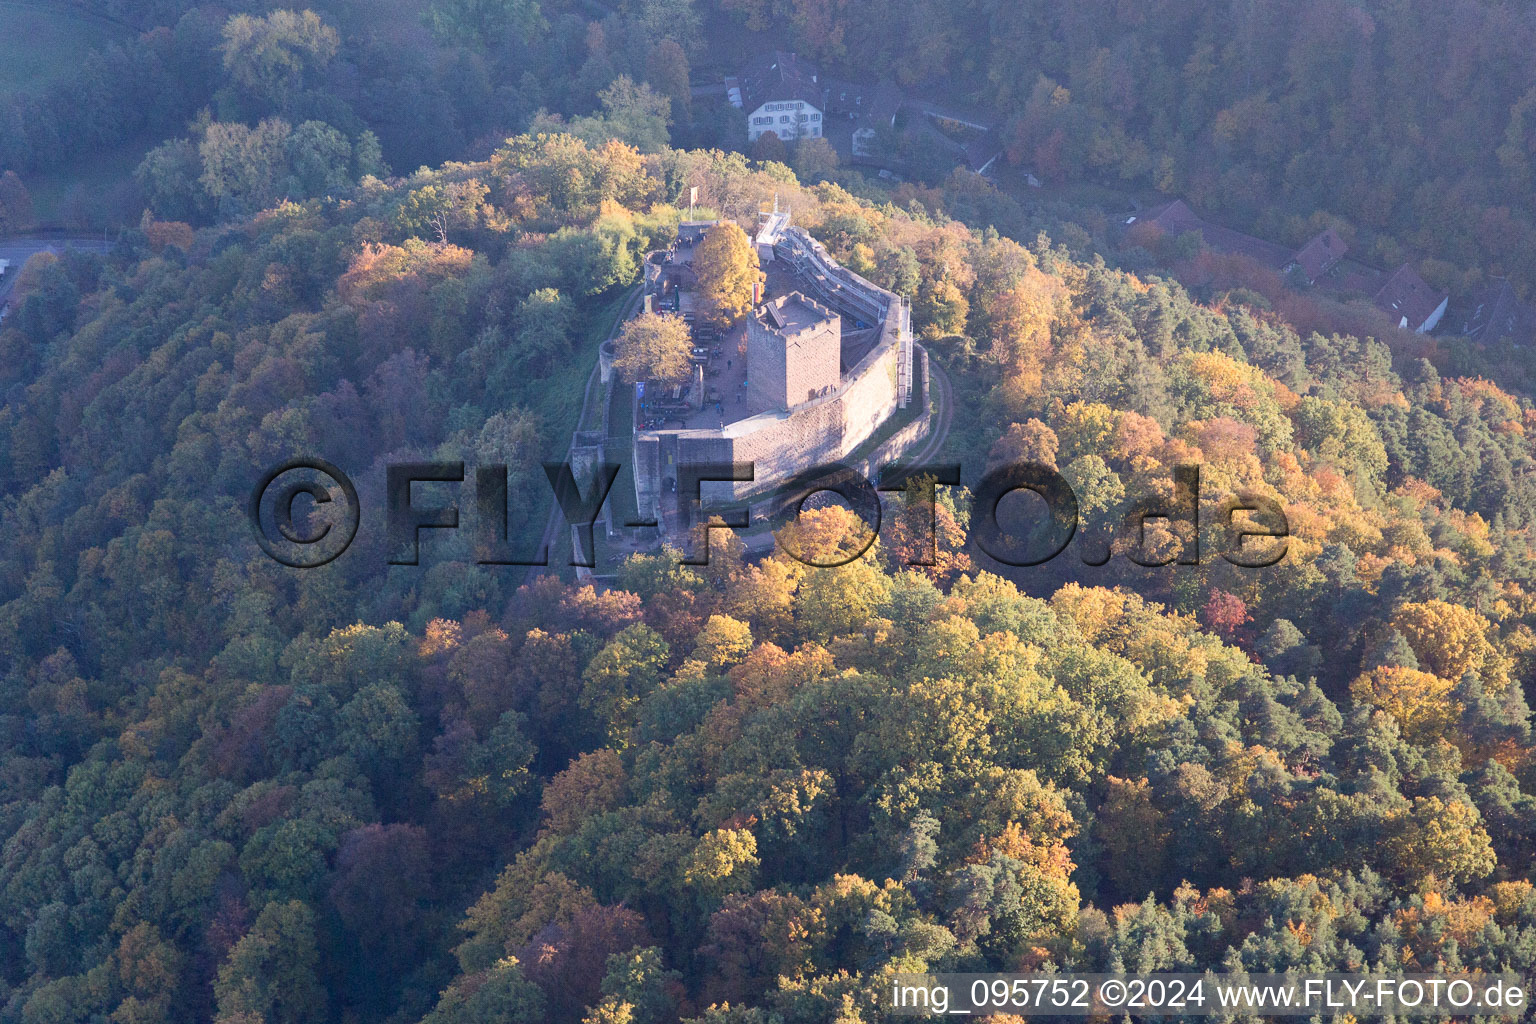 Aerial view of Klingenmünster in the state Rhineland-Palatinate, Germany